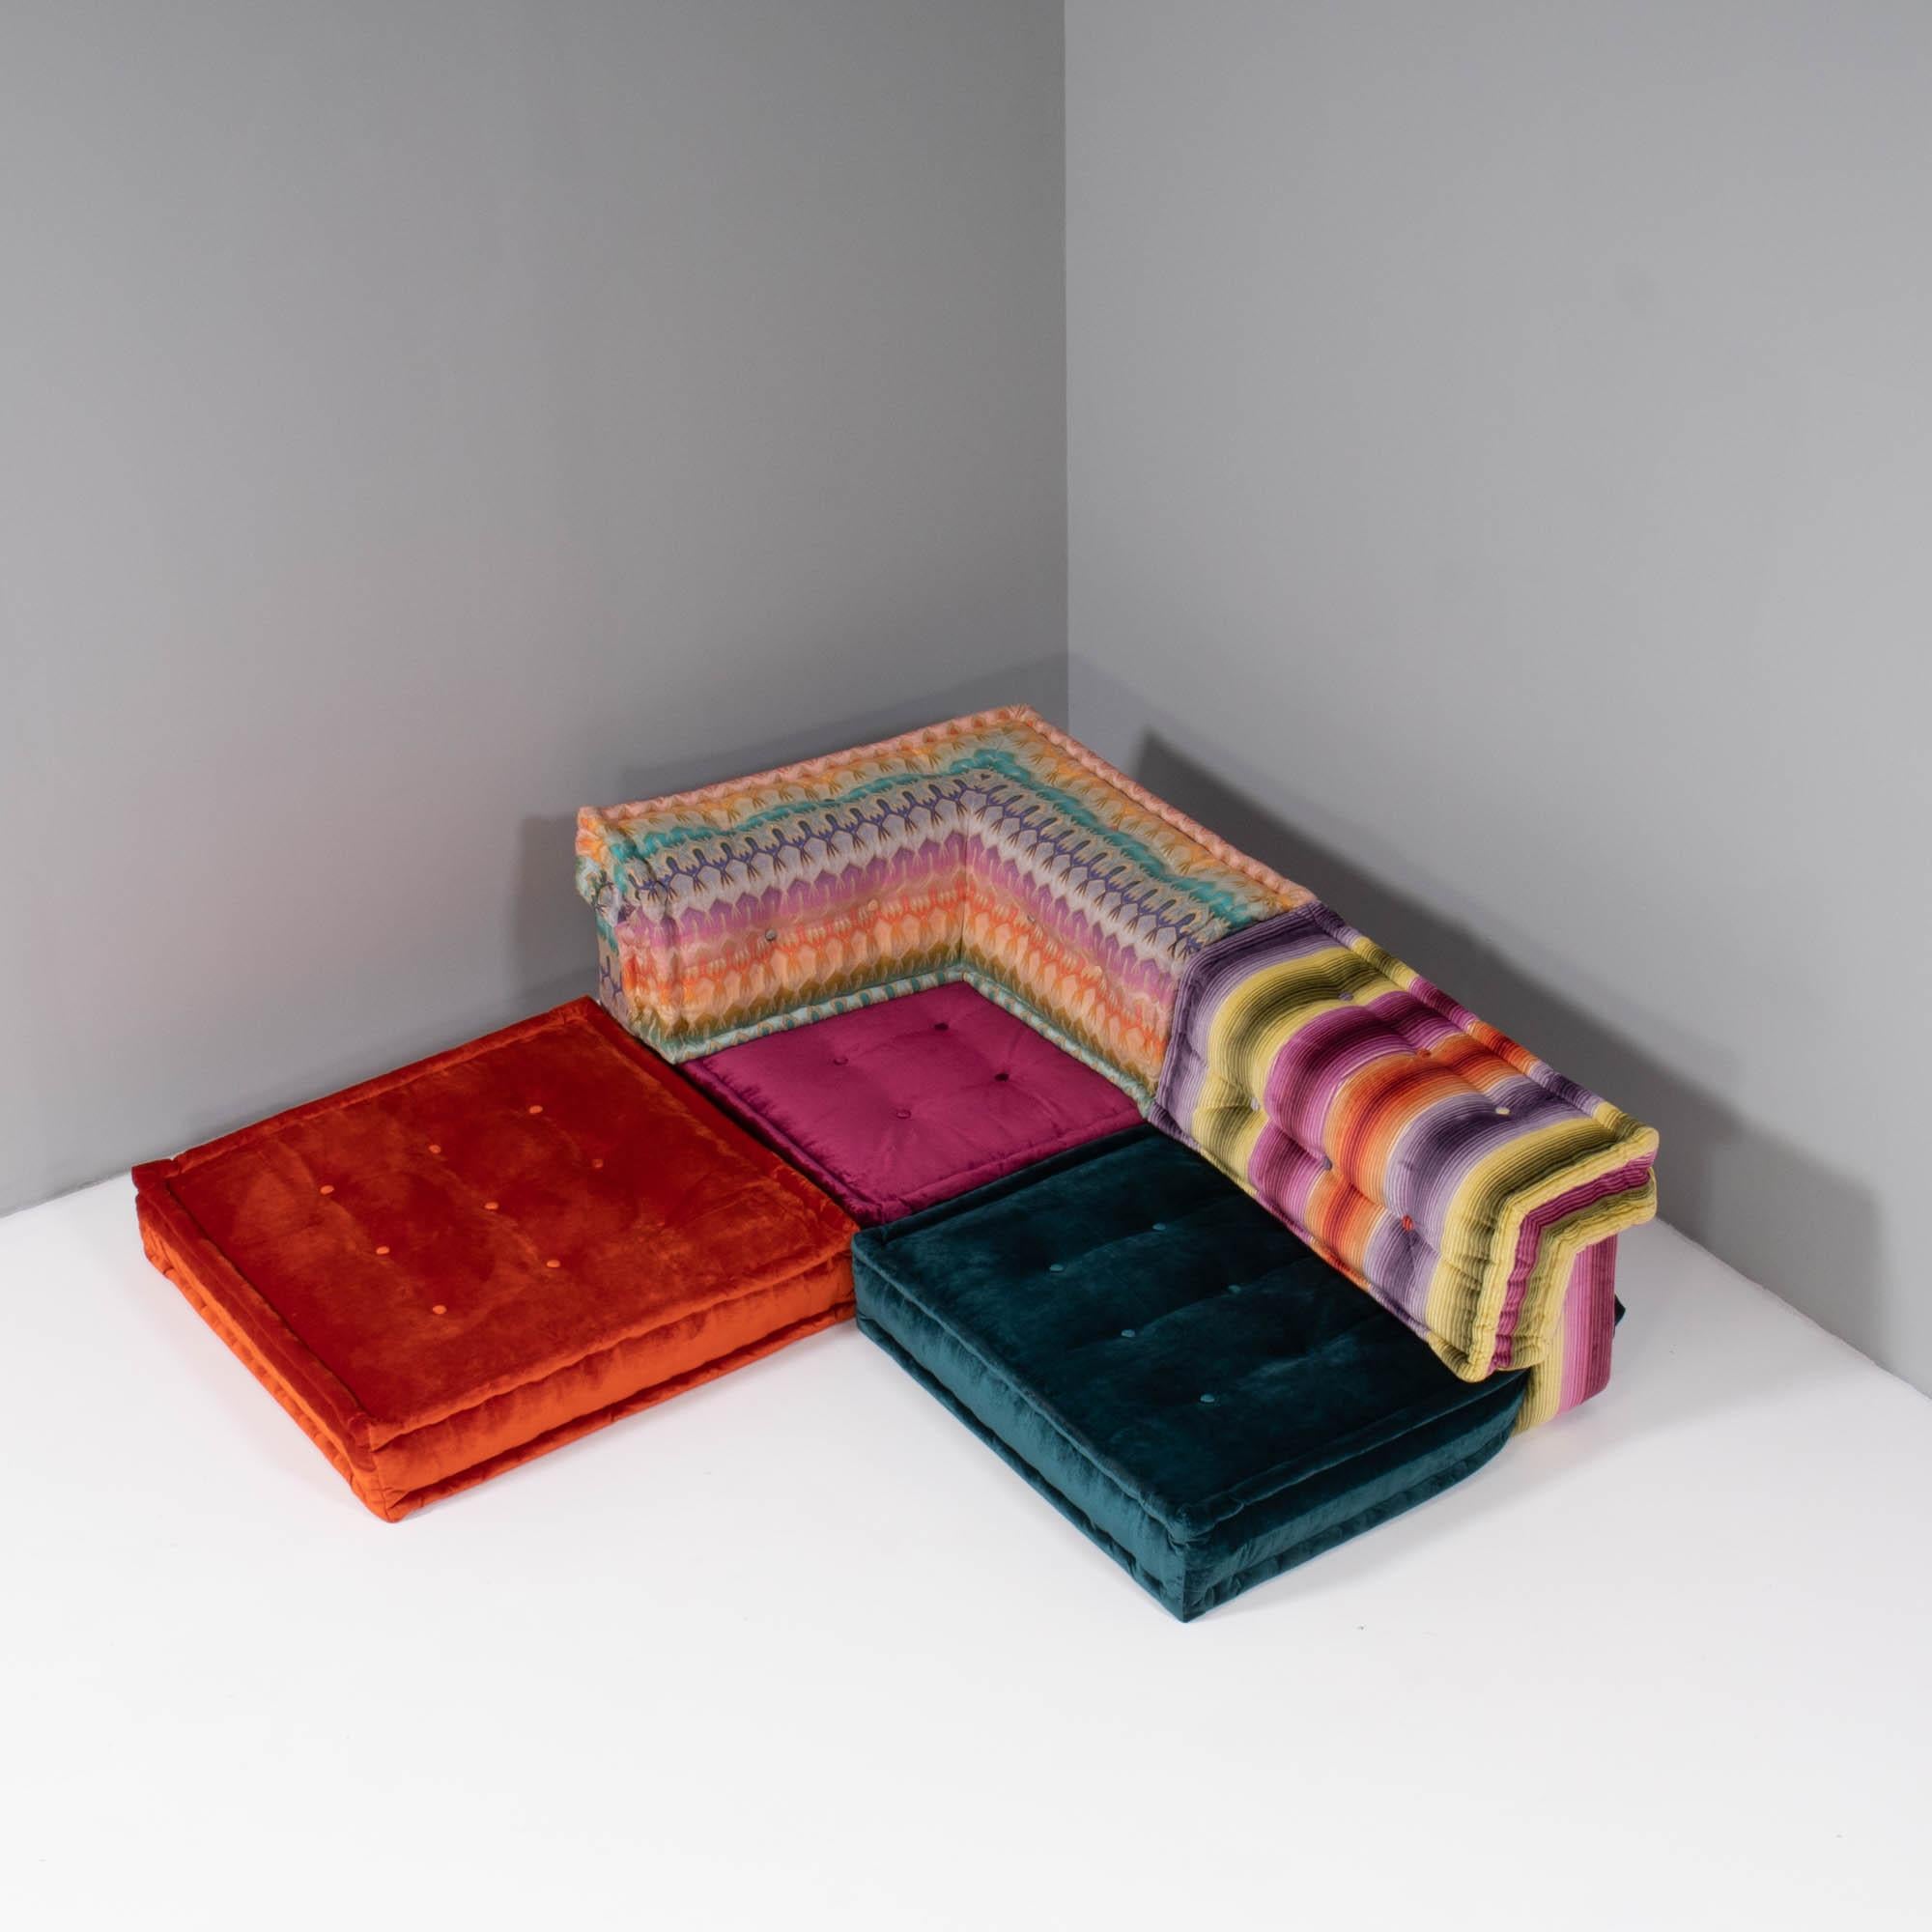 Originally designed by Hans Hopfer for Roche Bobois in 1971, the Mah Jong sofa has become a design classic.

Since its original conception, Roche Bobois has collaborated with a variety of design houses to upholster the sofa.

Comprising of five